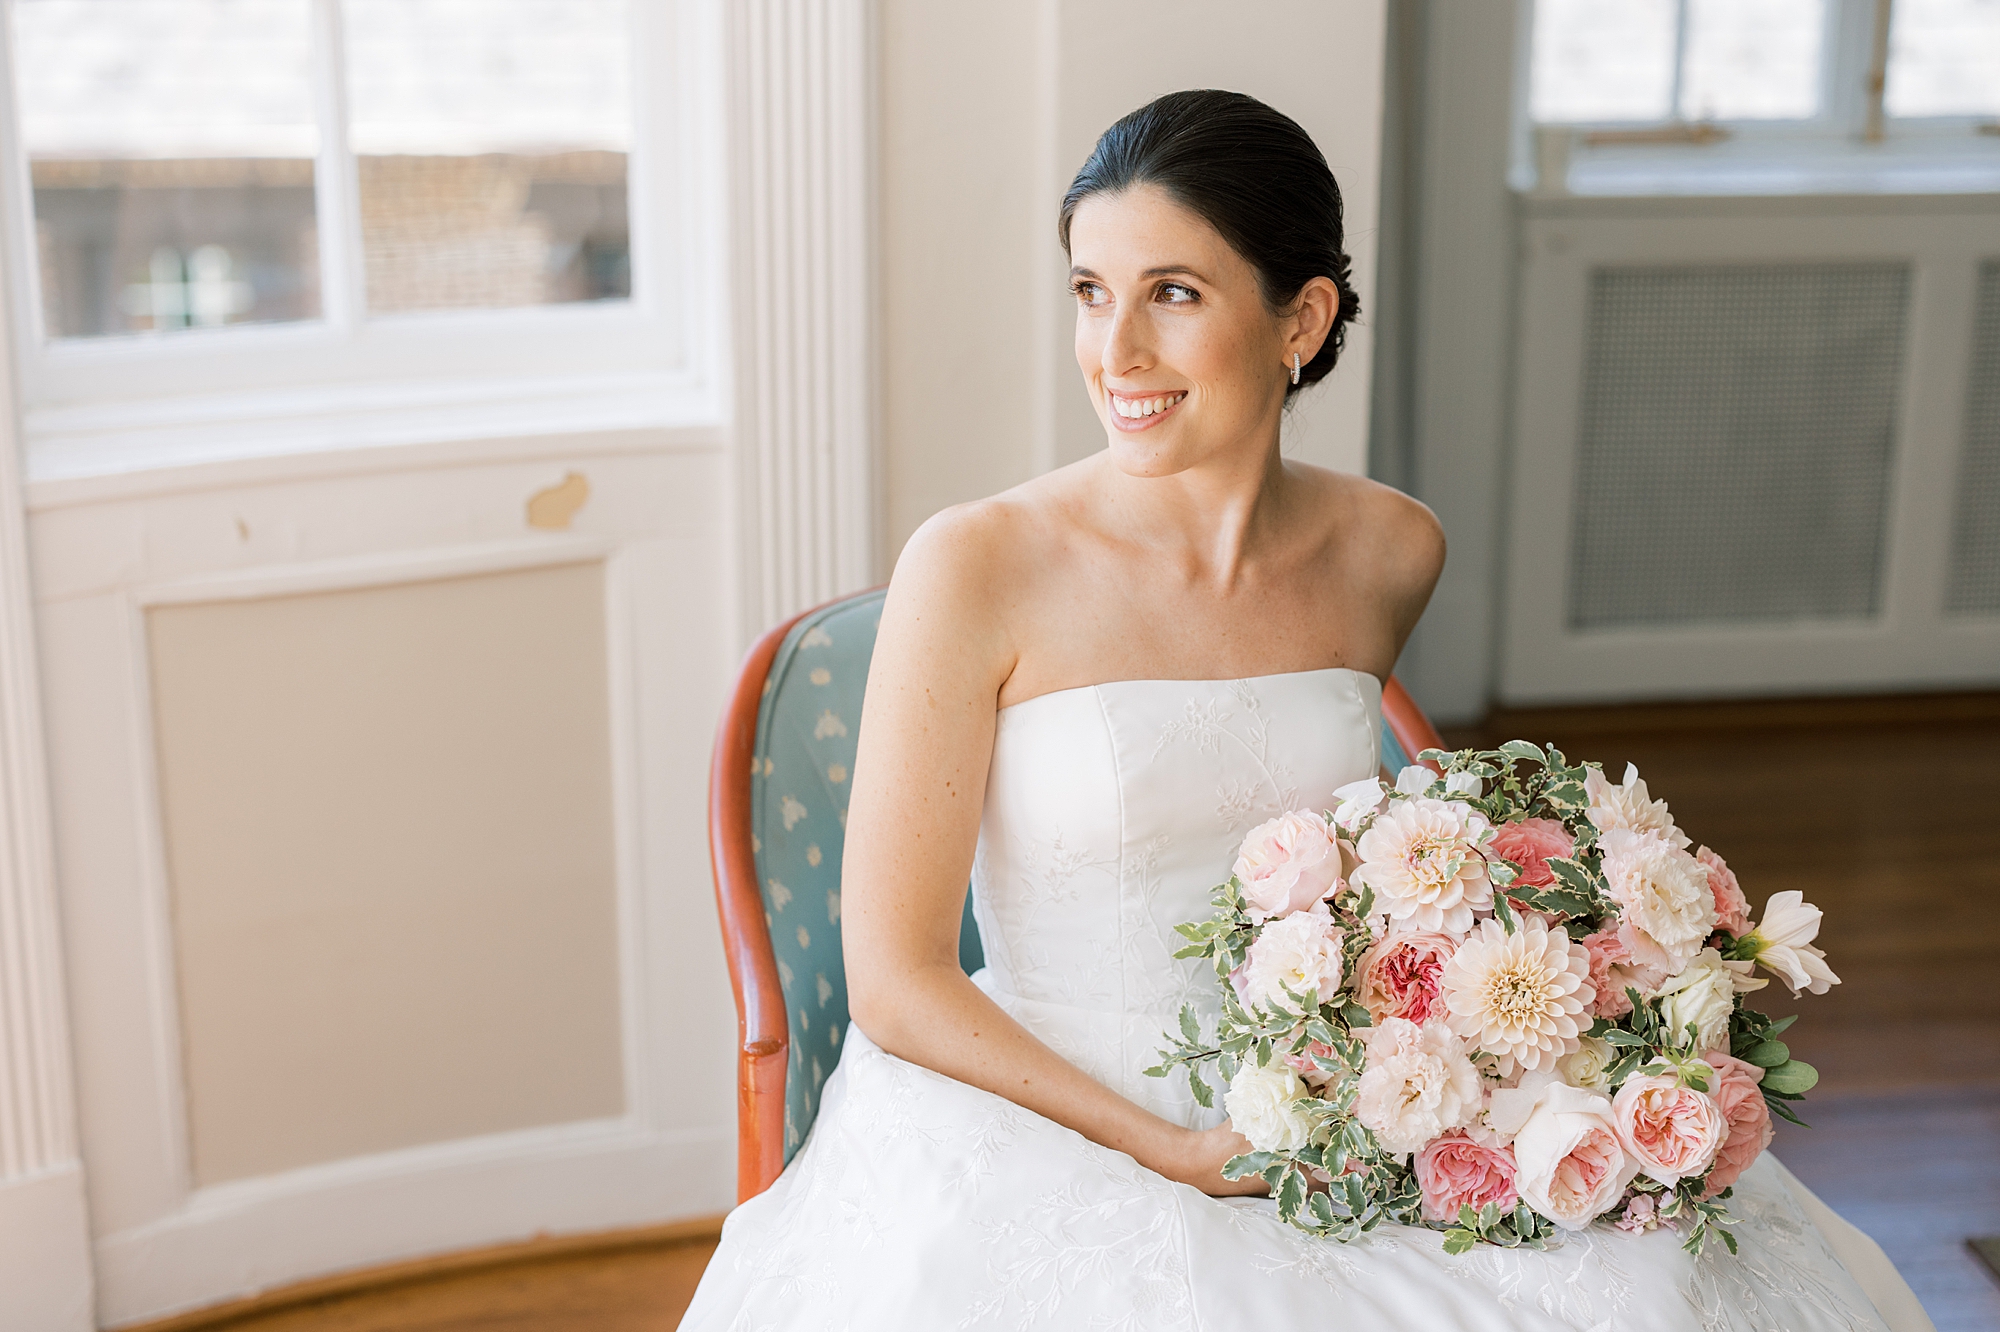 bride looks to the side while holding bouquet of pink and white flowers 